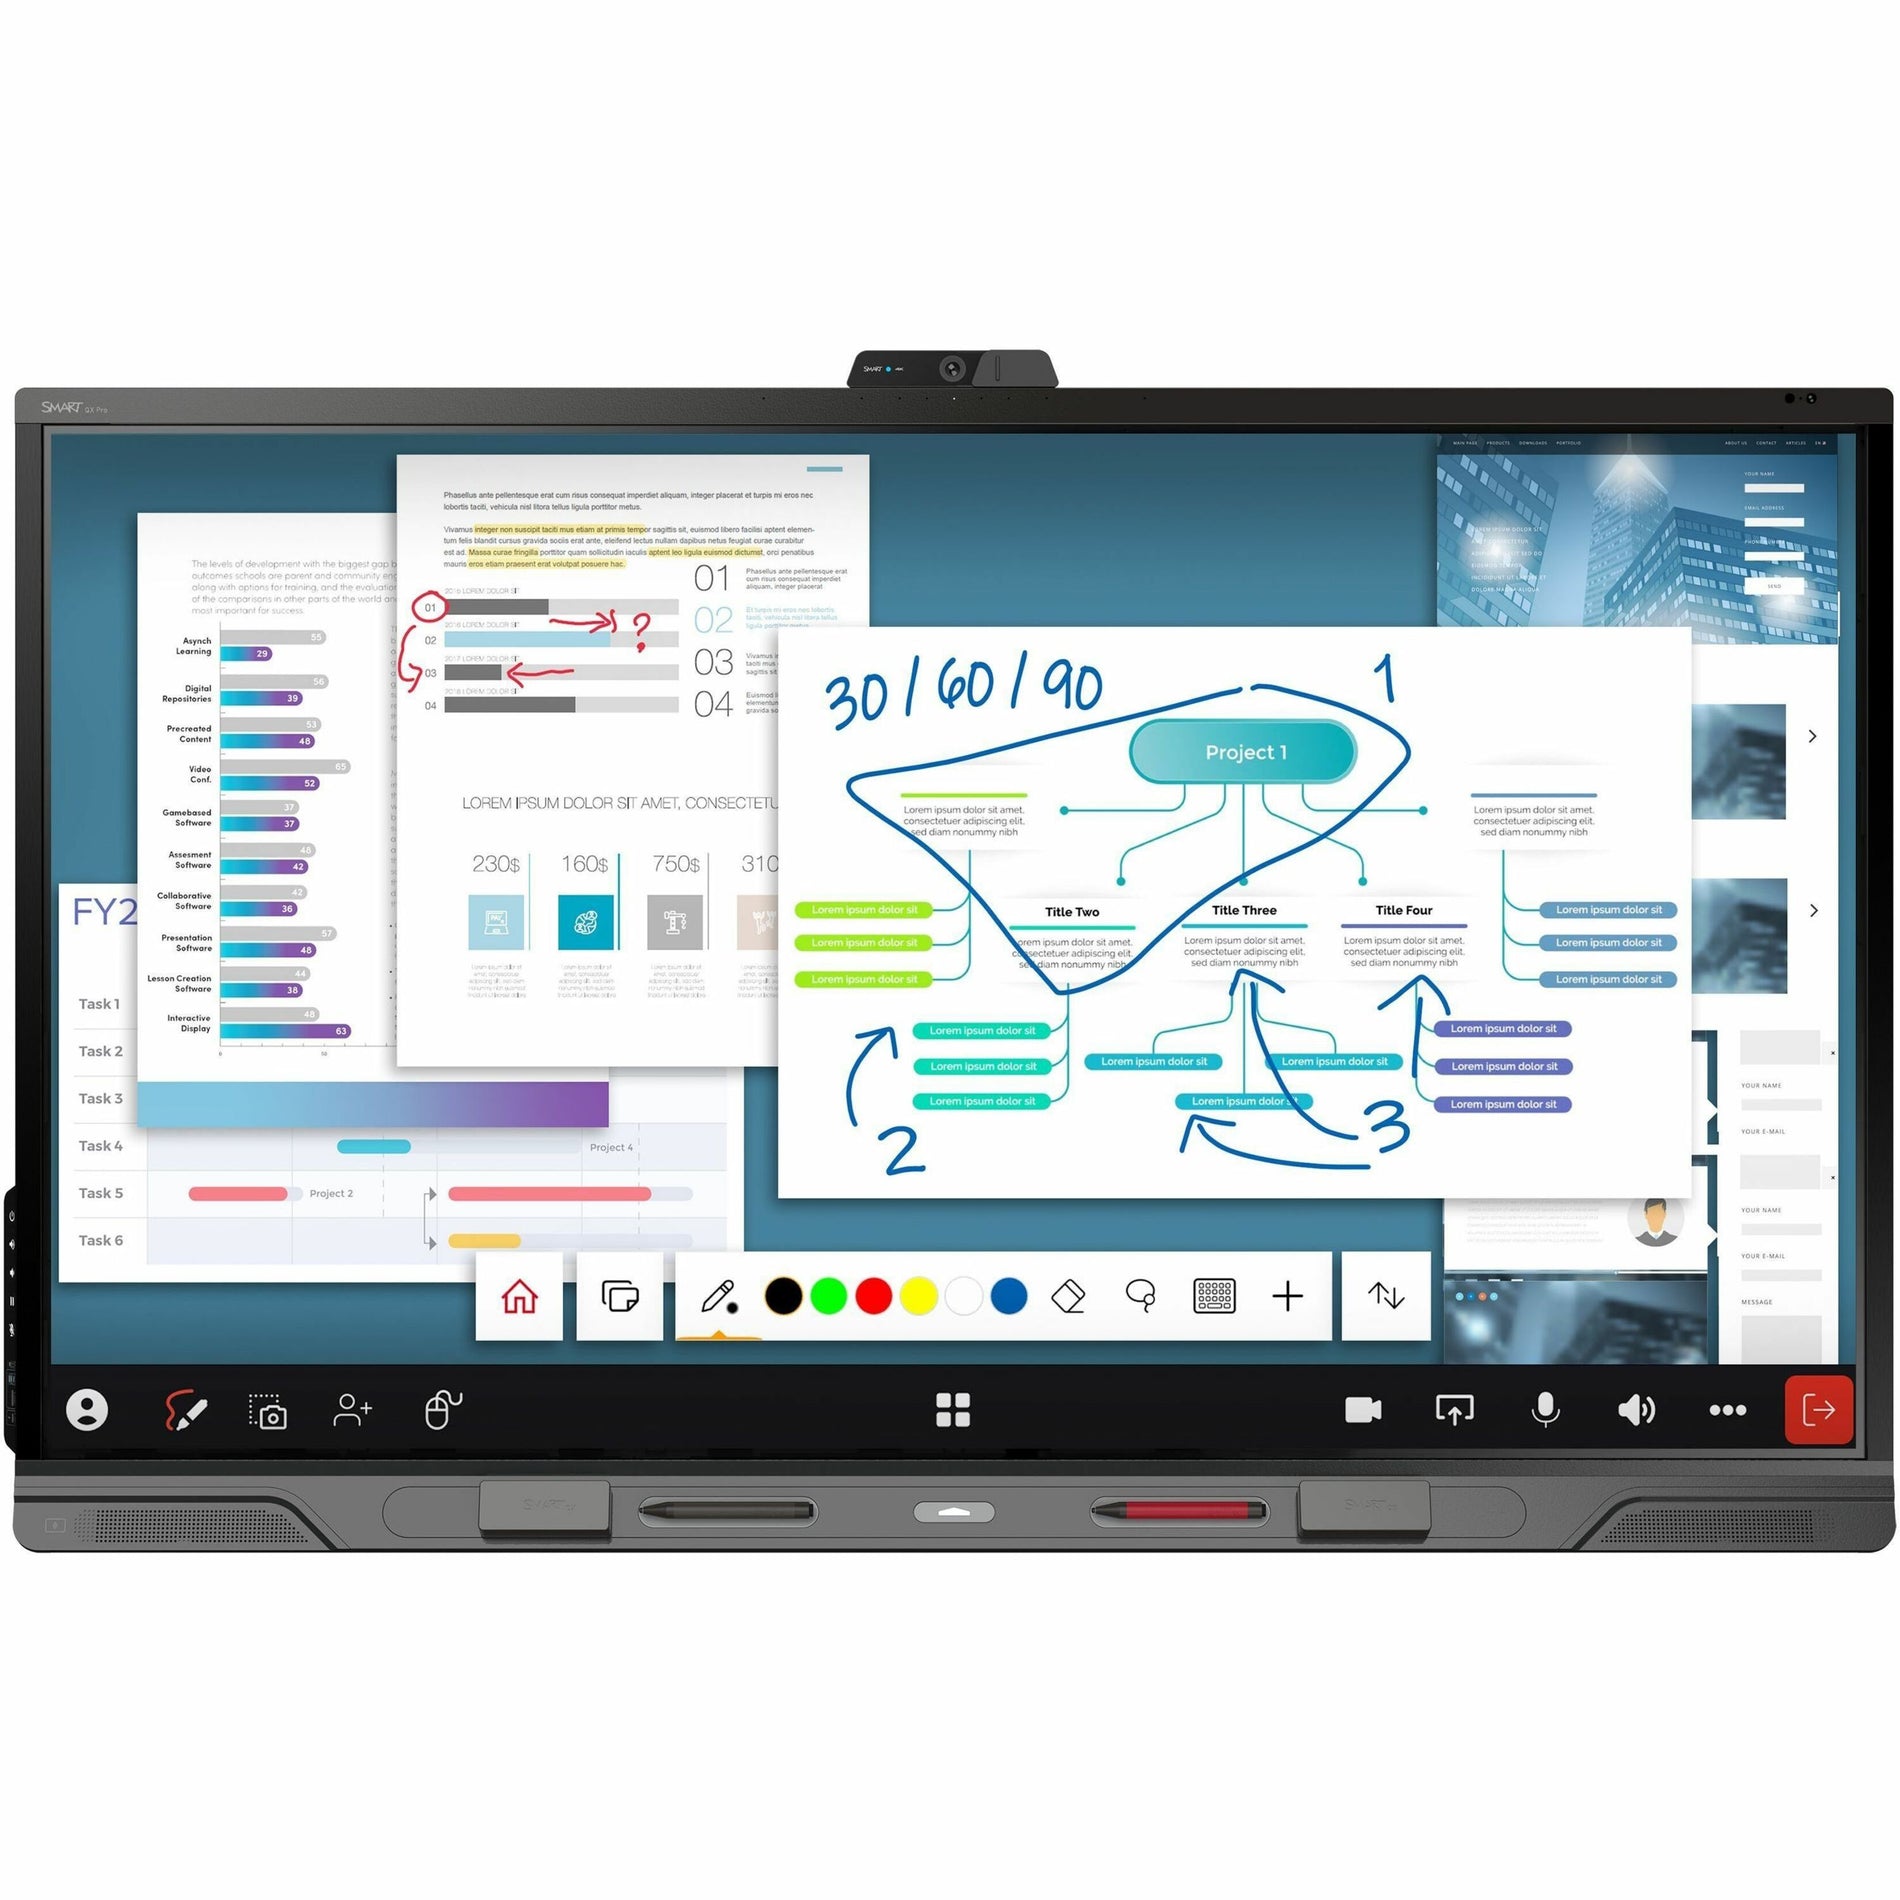 SMART SBID-QX286-P SMART Board QX086-P Interactive Display with iQ, 86" Multi-touch Screen, Android 11